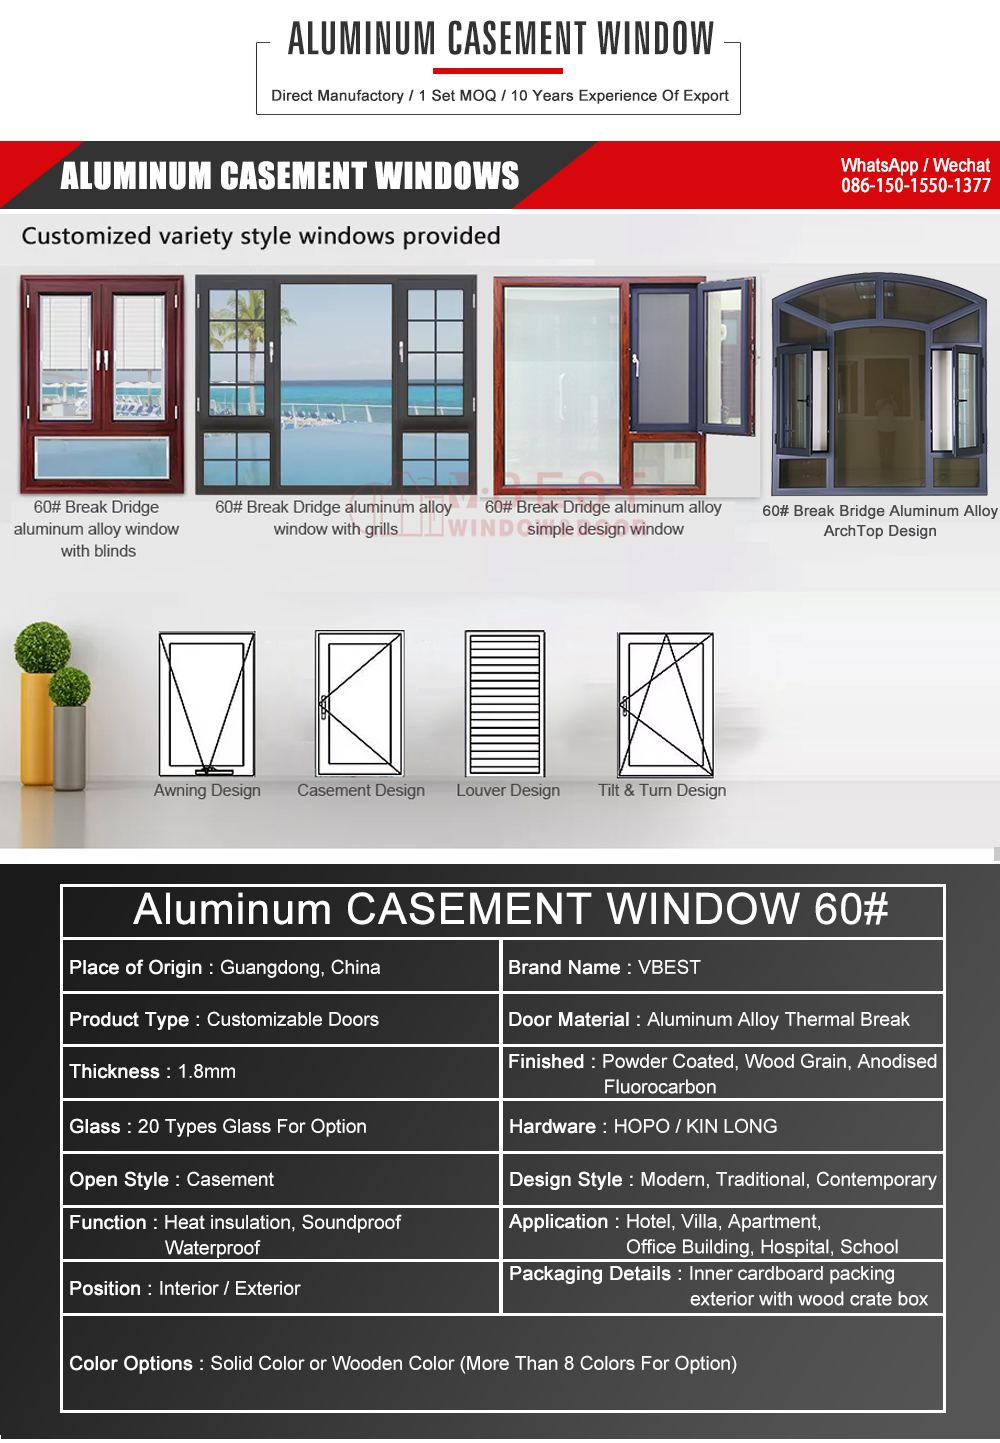 New Waterproof and Sound Insulation aluminium Wooden Color Windows